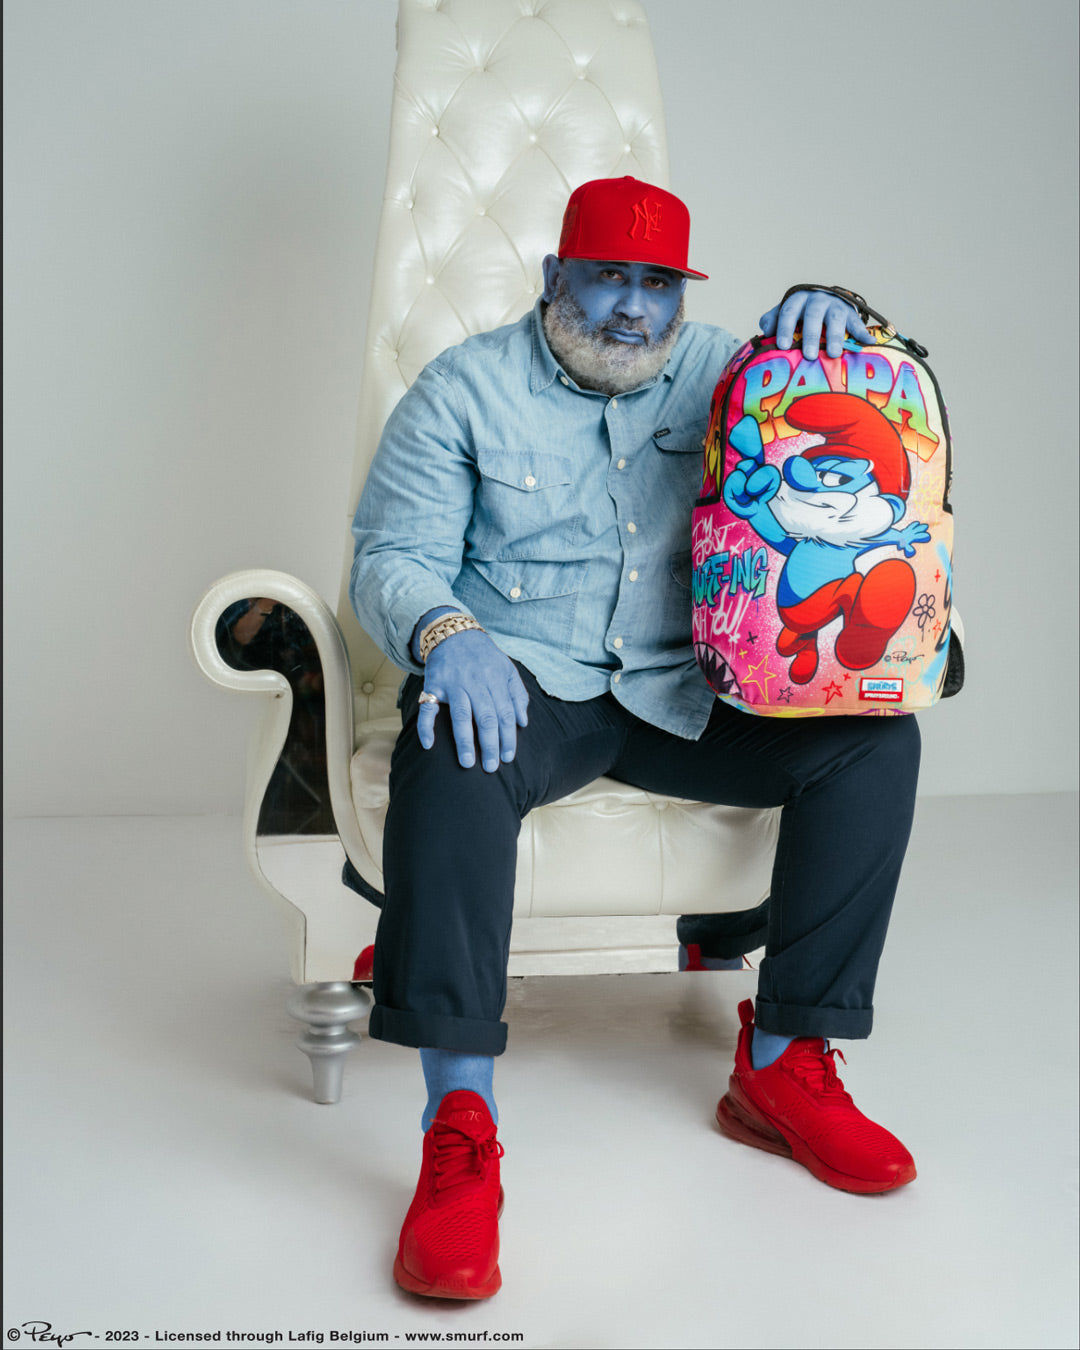 PAP SMURF ON THE RUN BACKPACK